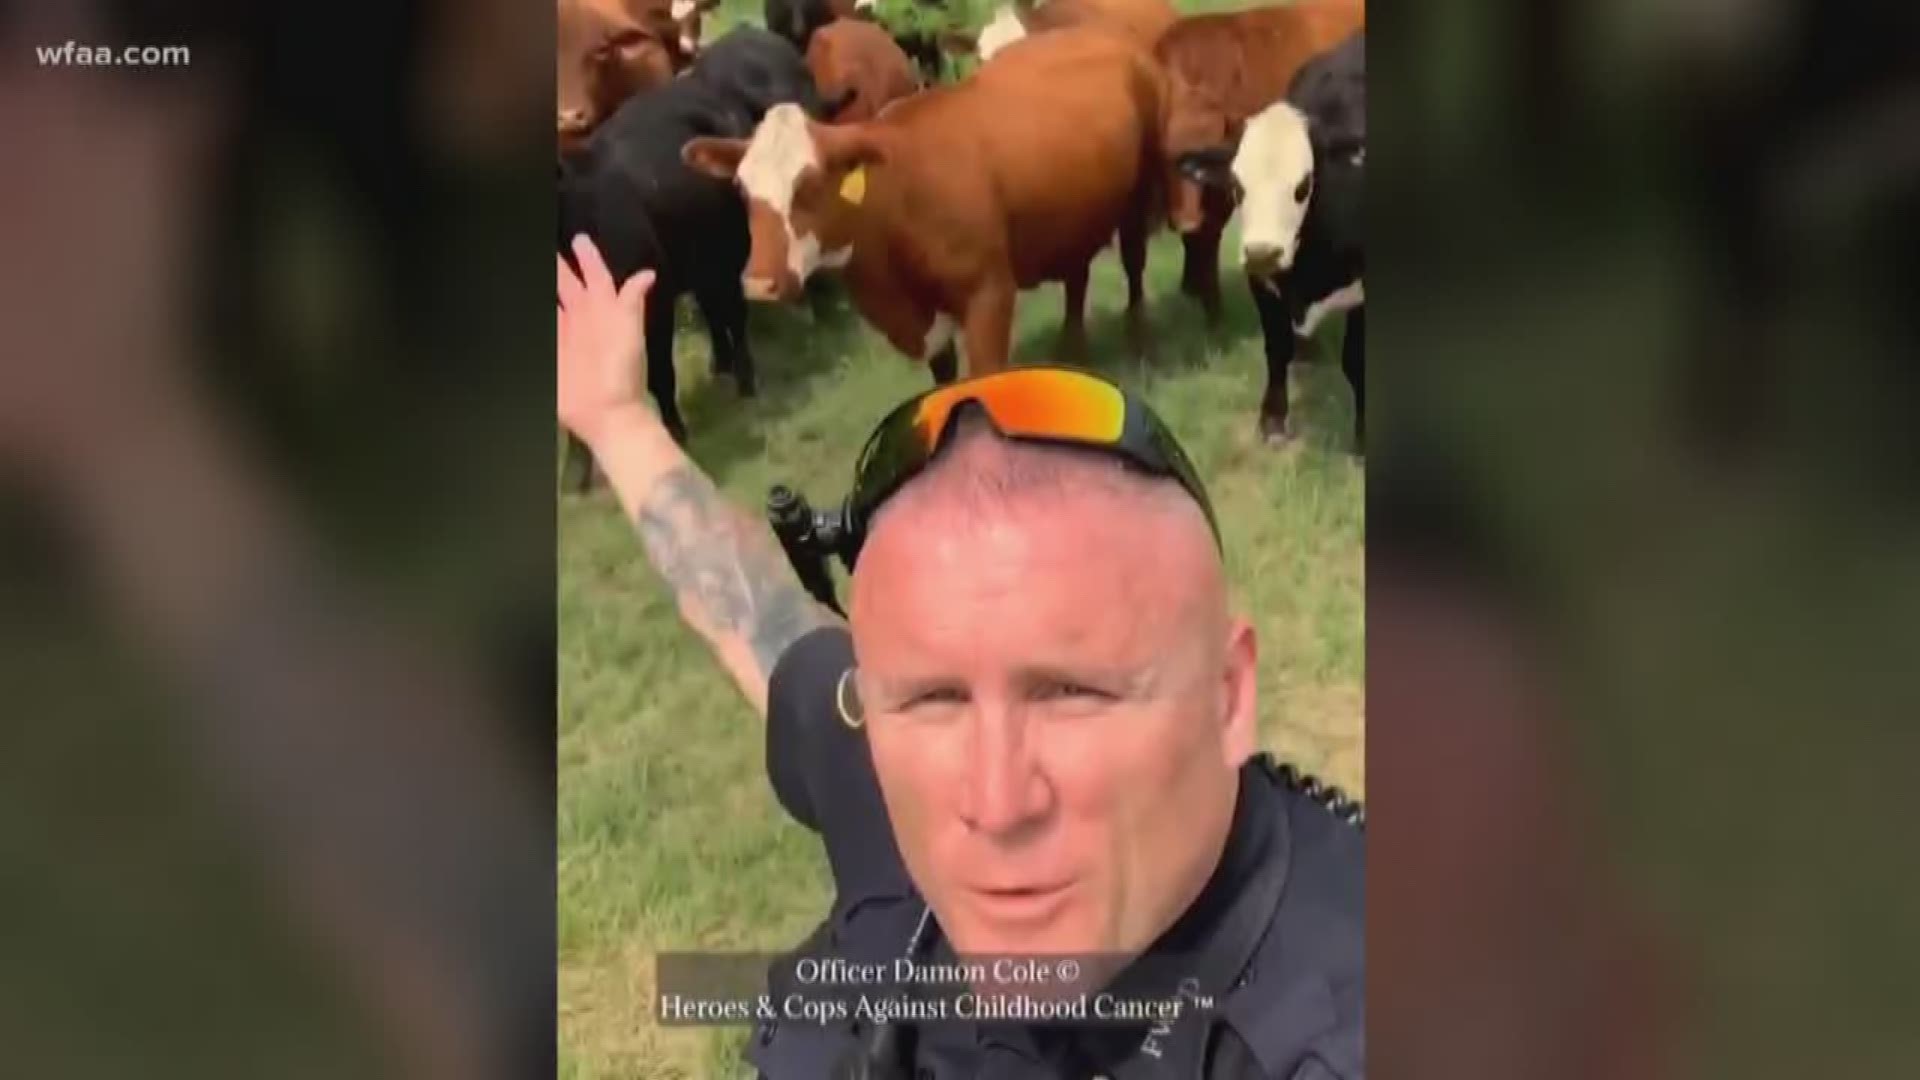 The police officer begged the cows to stay out of the sharp, high grass and even offered them Chick-fil-A if they'd cooperate.